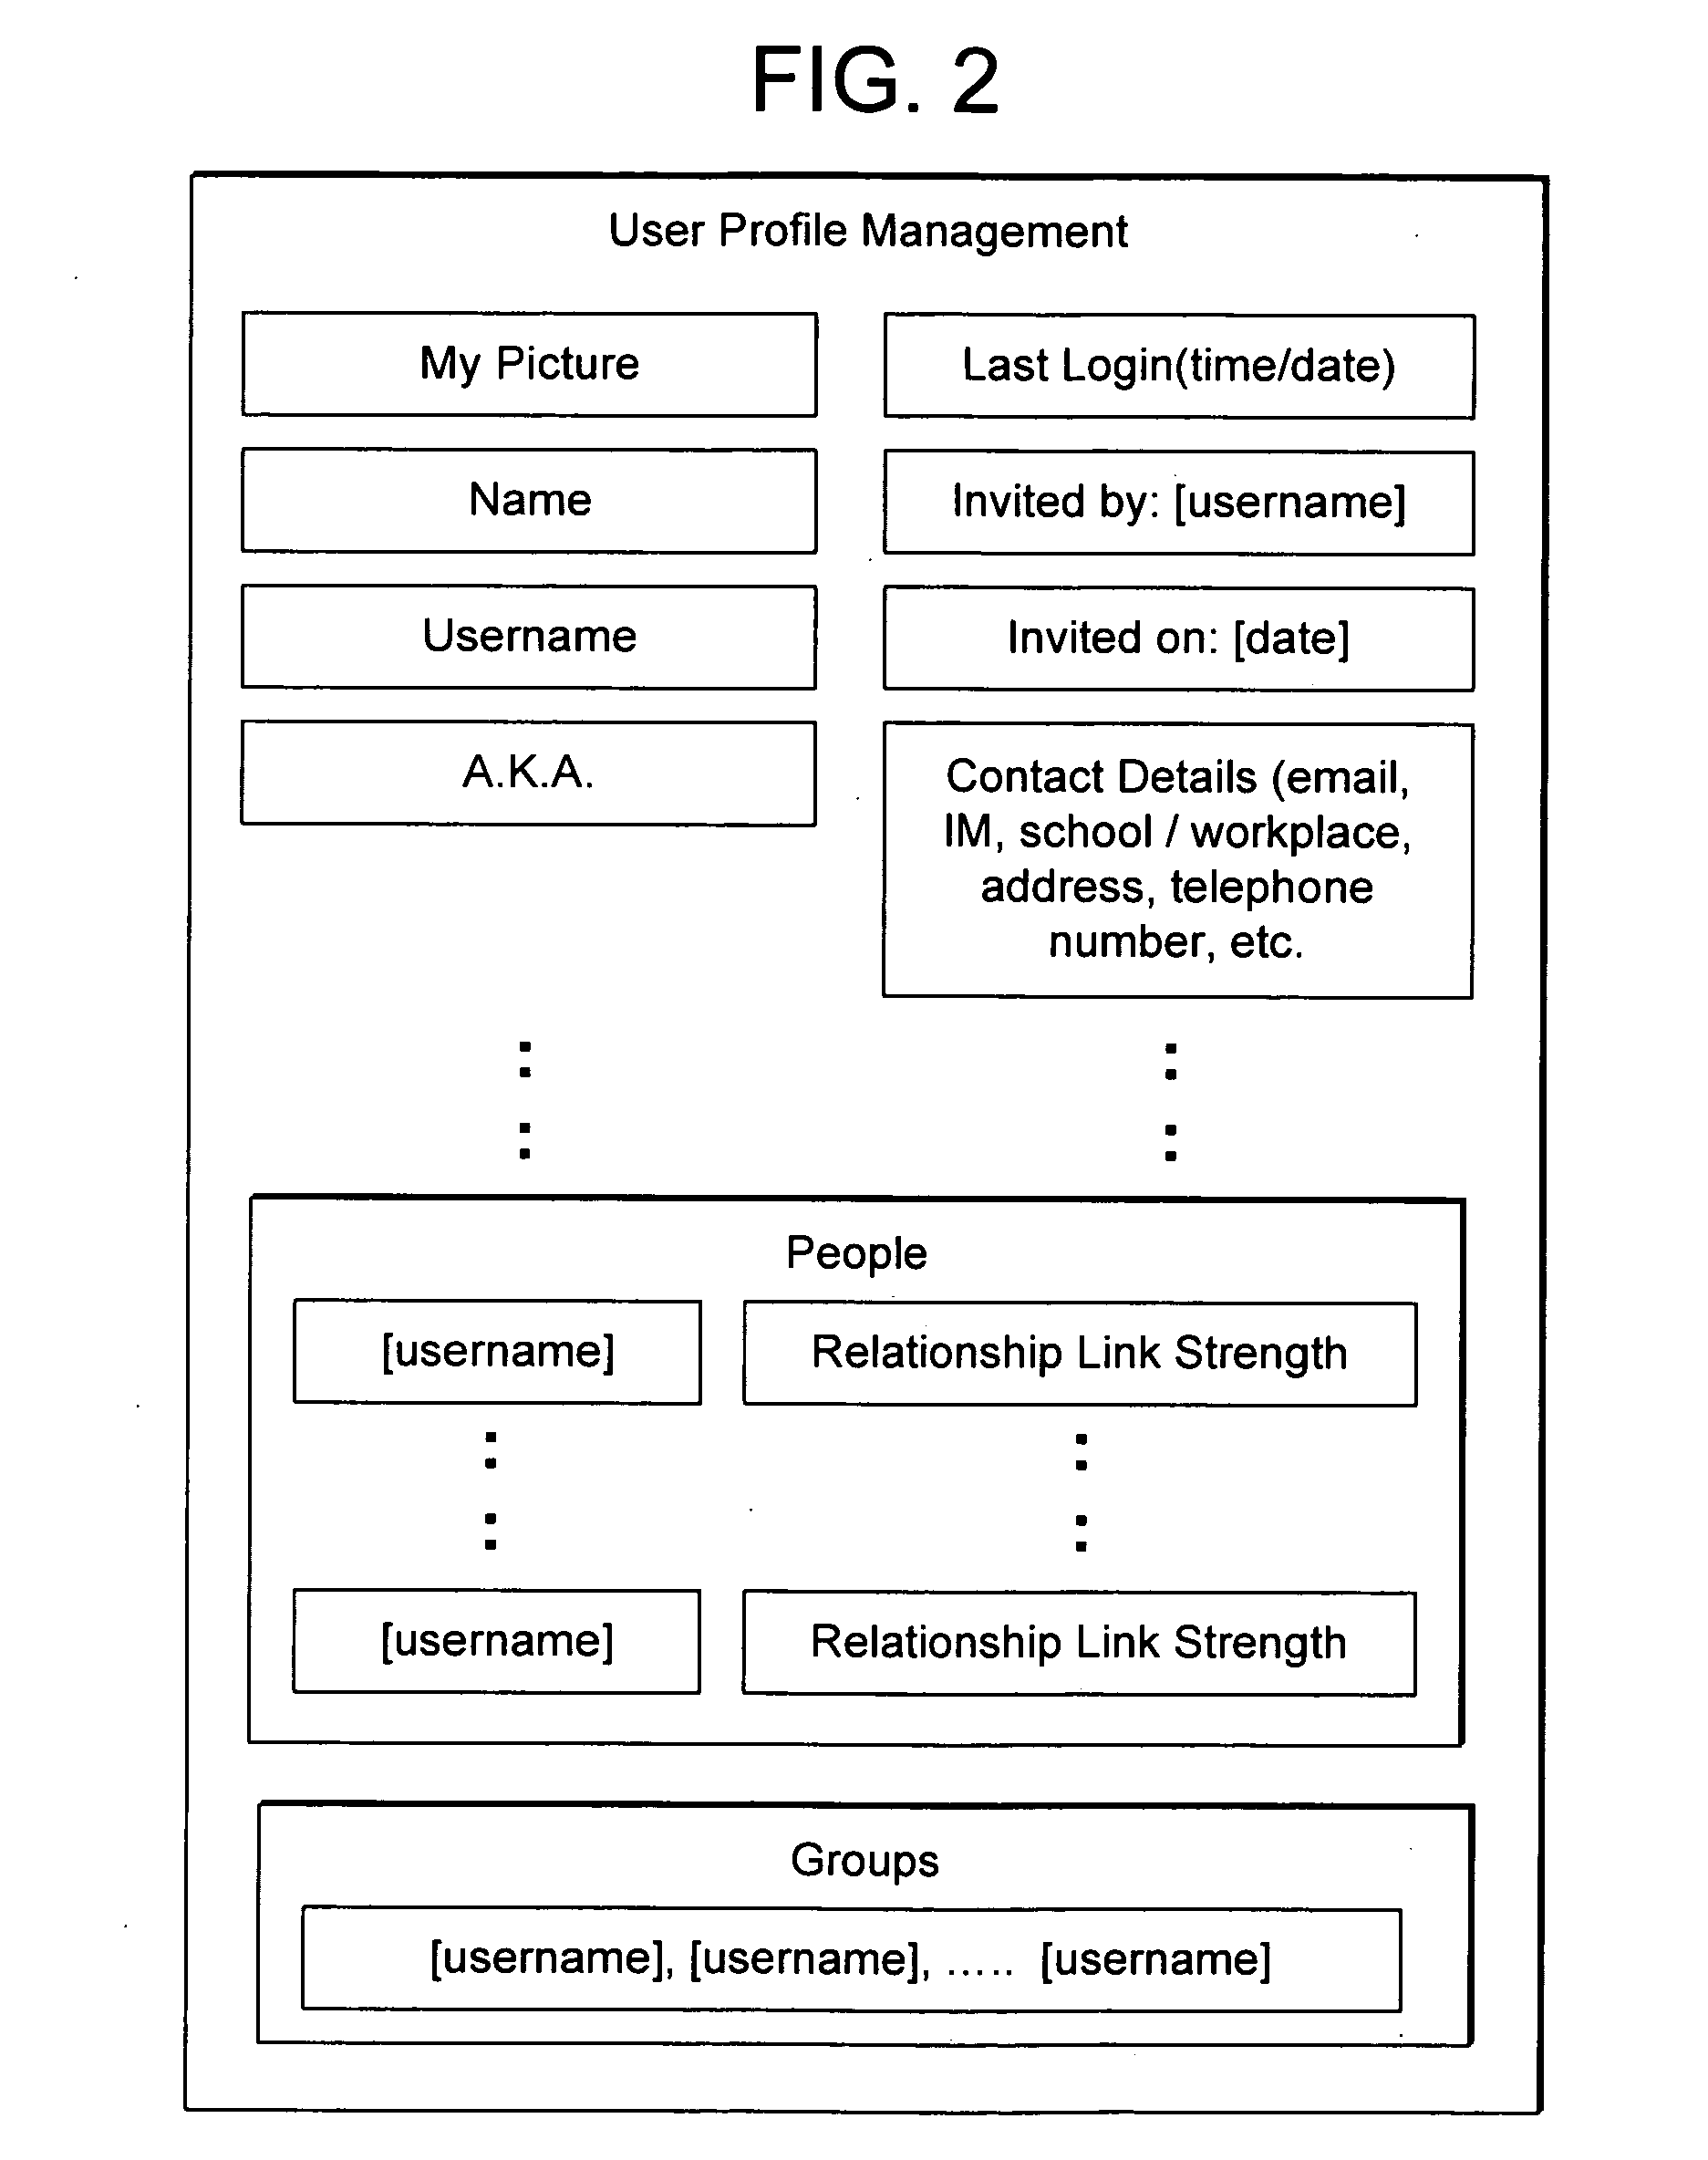 System and method for dynamically generating, maintaining, and growing an online social network